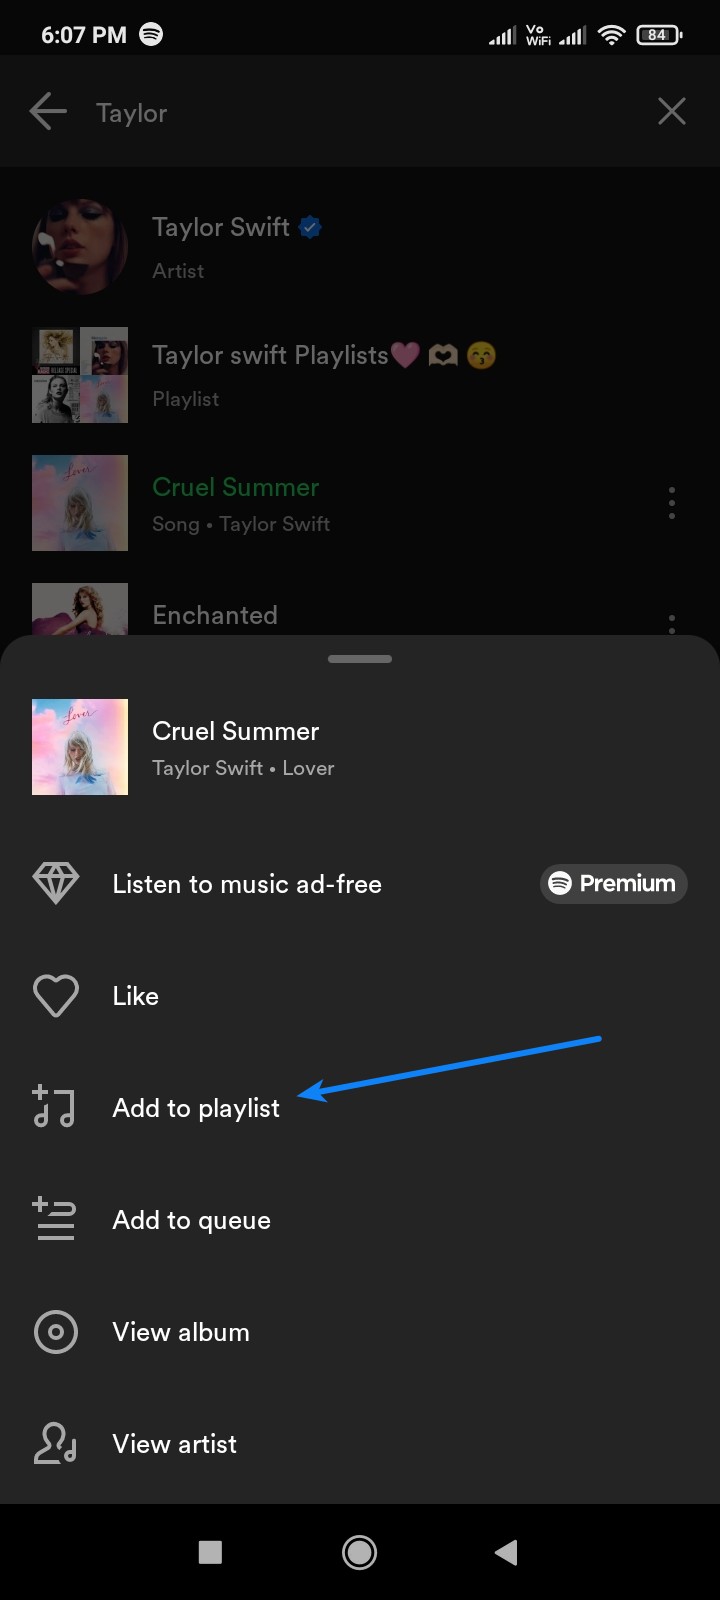 How to Download Songs on Spotify - Add to Playlist